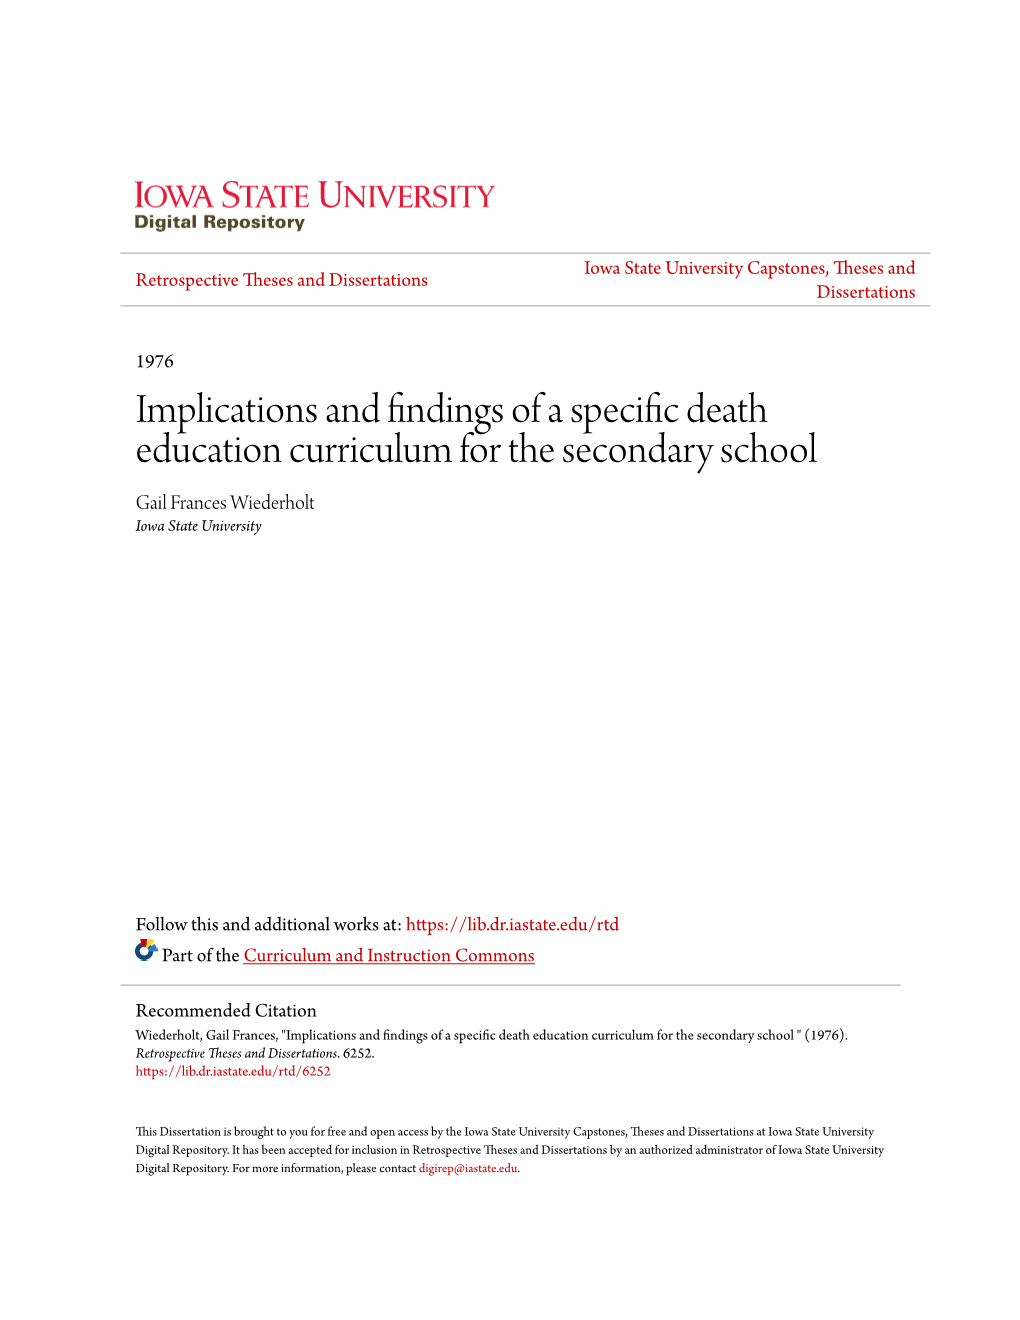 Implications and Findings of a Specific Death Education Curriculum for the Secondary School Gail Frances Wiederholt Iowa State University